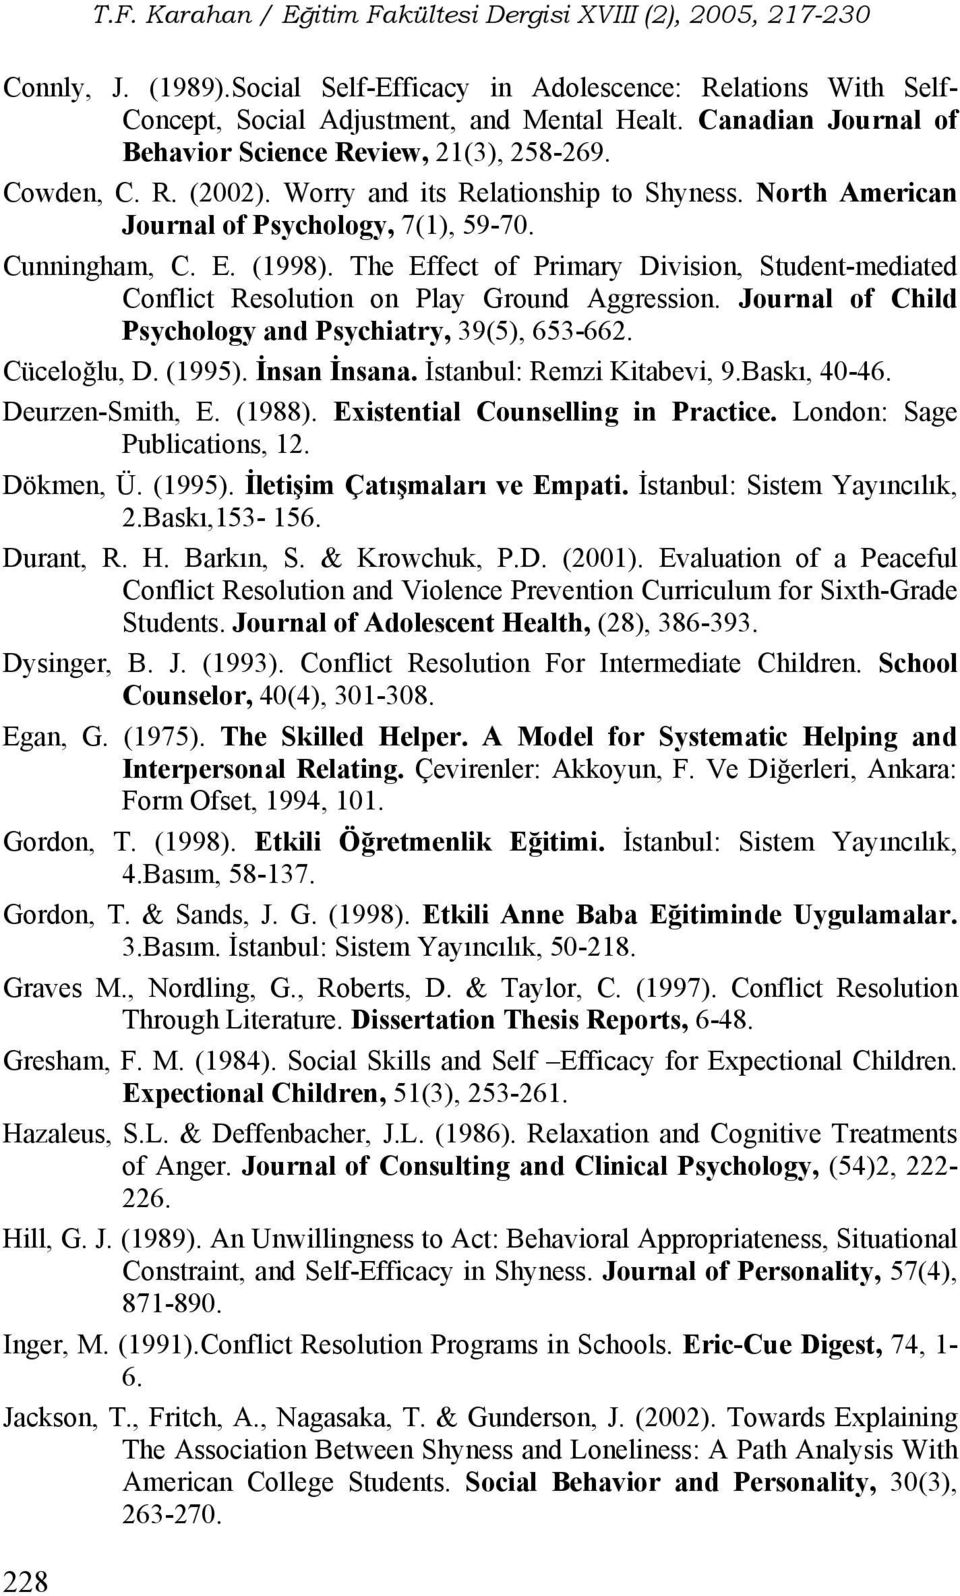 The Effect of Primary Division, Student-mediated Conflict Resolution on Play Ground Aggression. Journal of Child Psychology and Psychiatry, 39(5), 653-662. Cüceloğlu, D. (1995). İnsan İnsana.